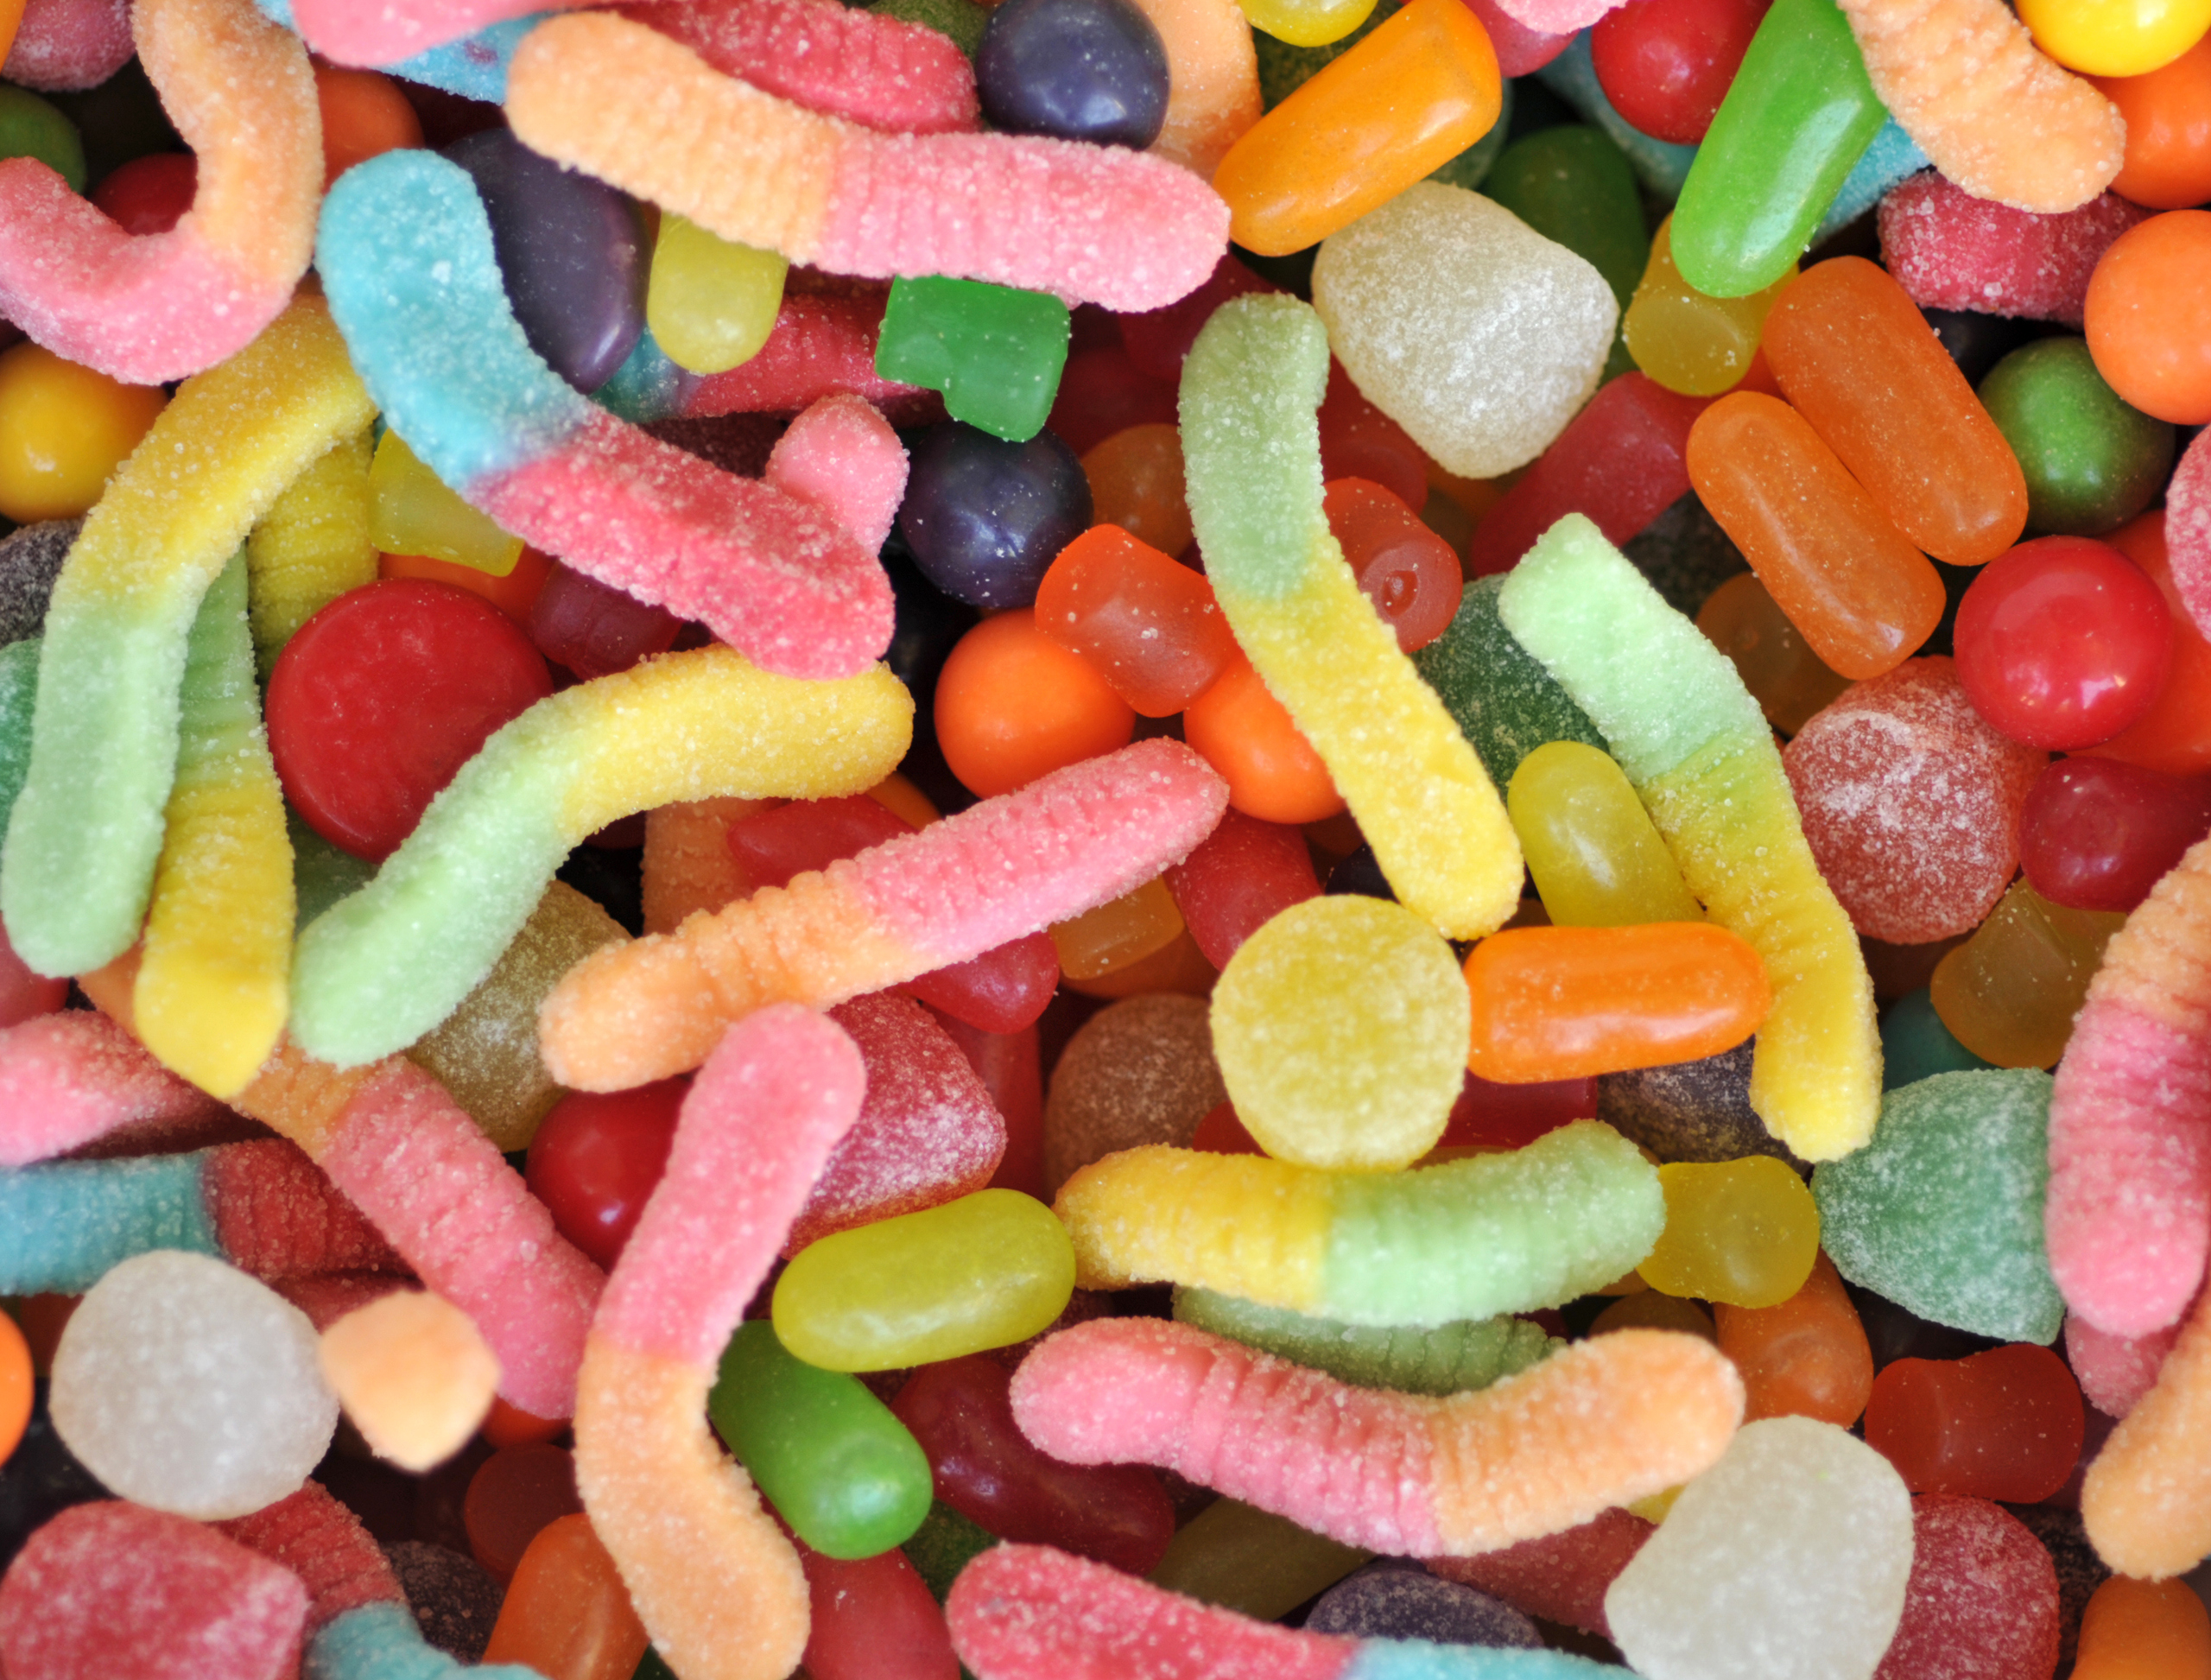 Assorted gummy candies and jelly beans in a pile